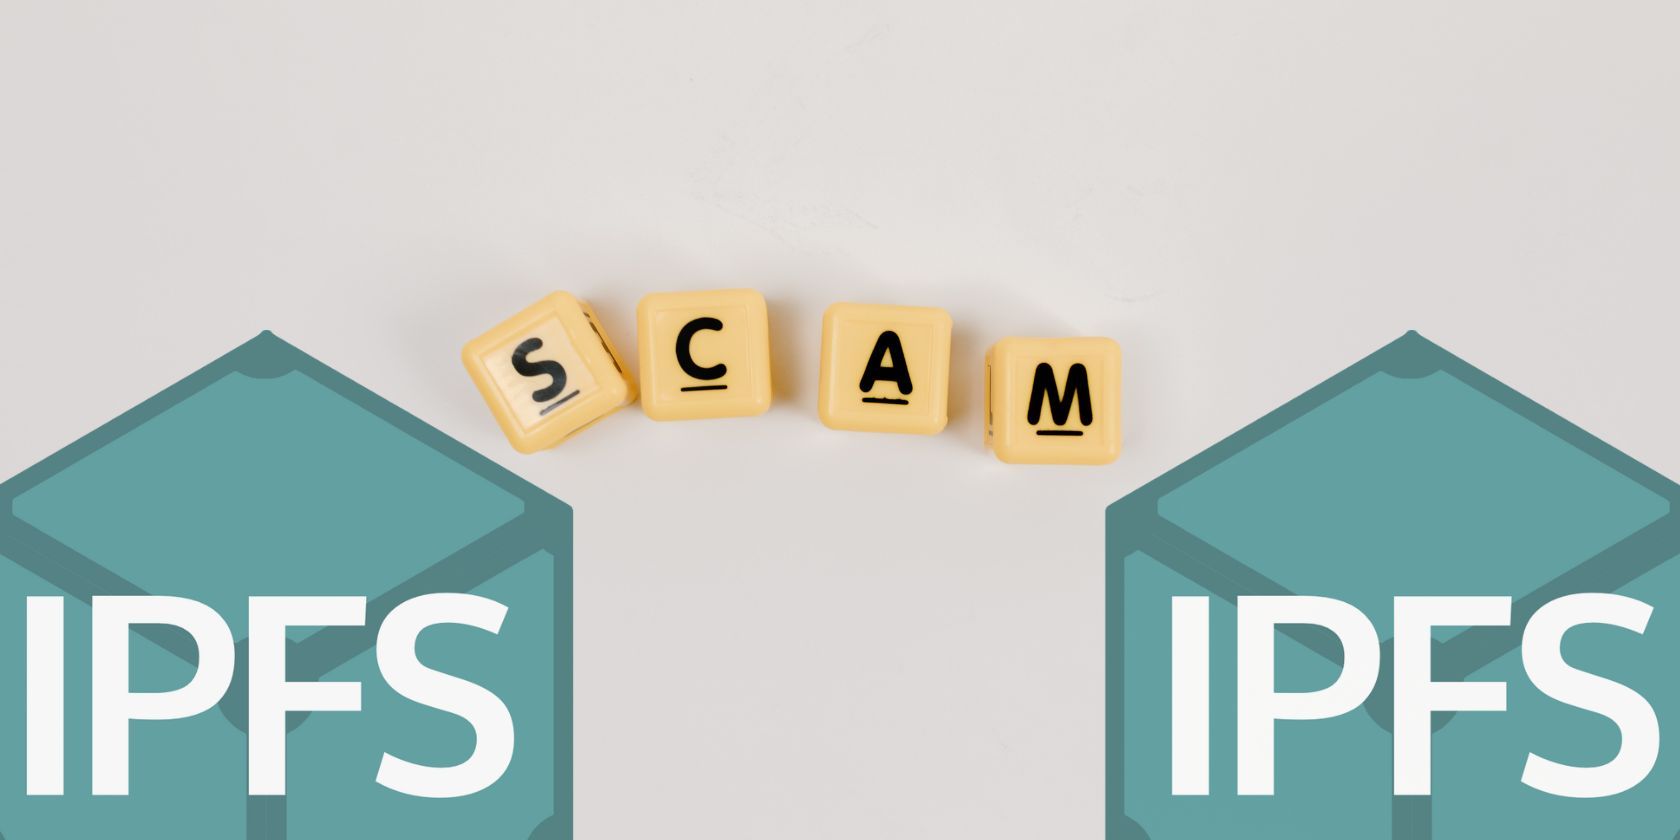 IPFS logos and scam letter on plain background